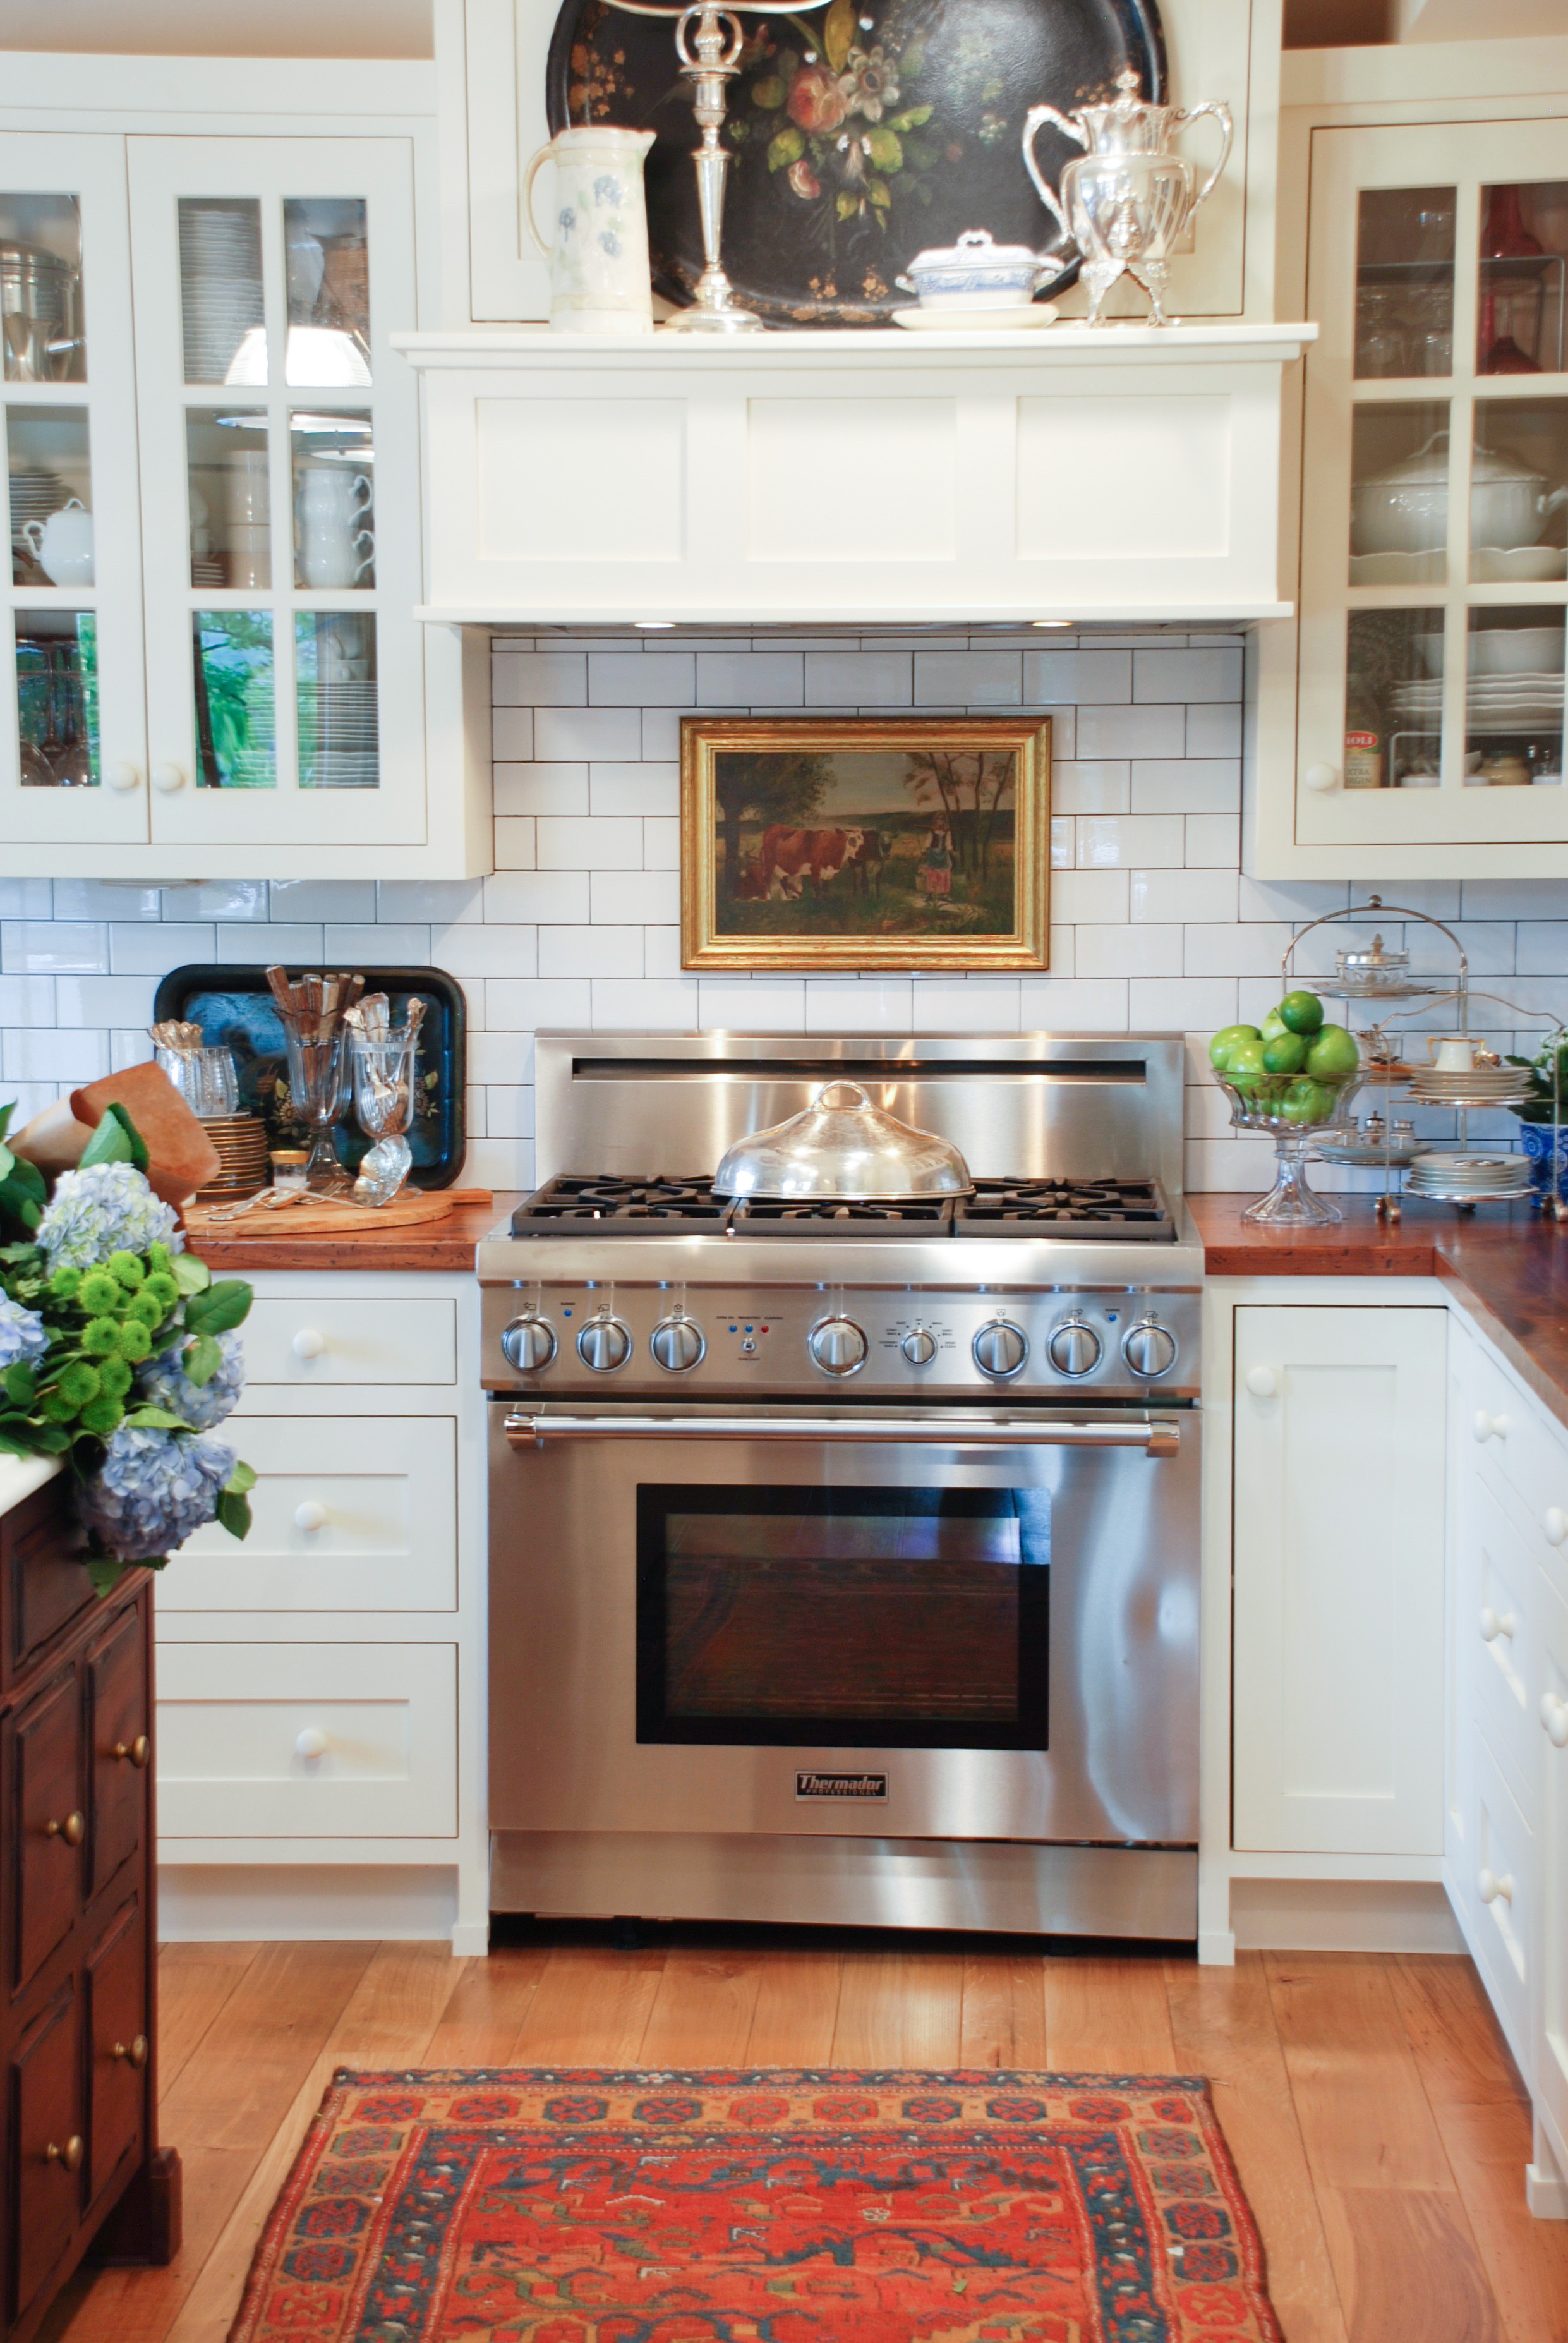 Decorating Dilemma: How to Decorate Above Your Stove - Nell Hill's